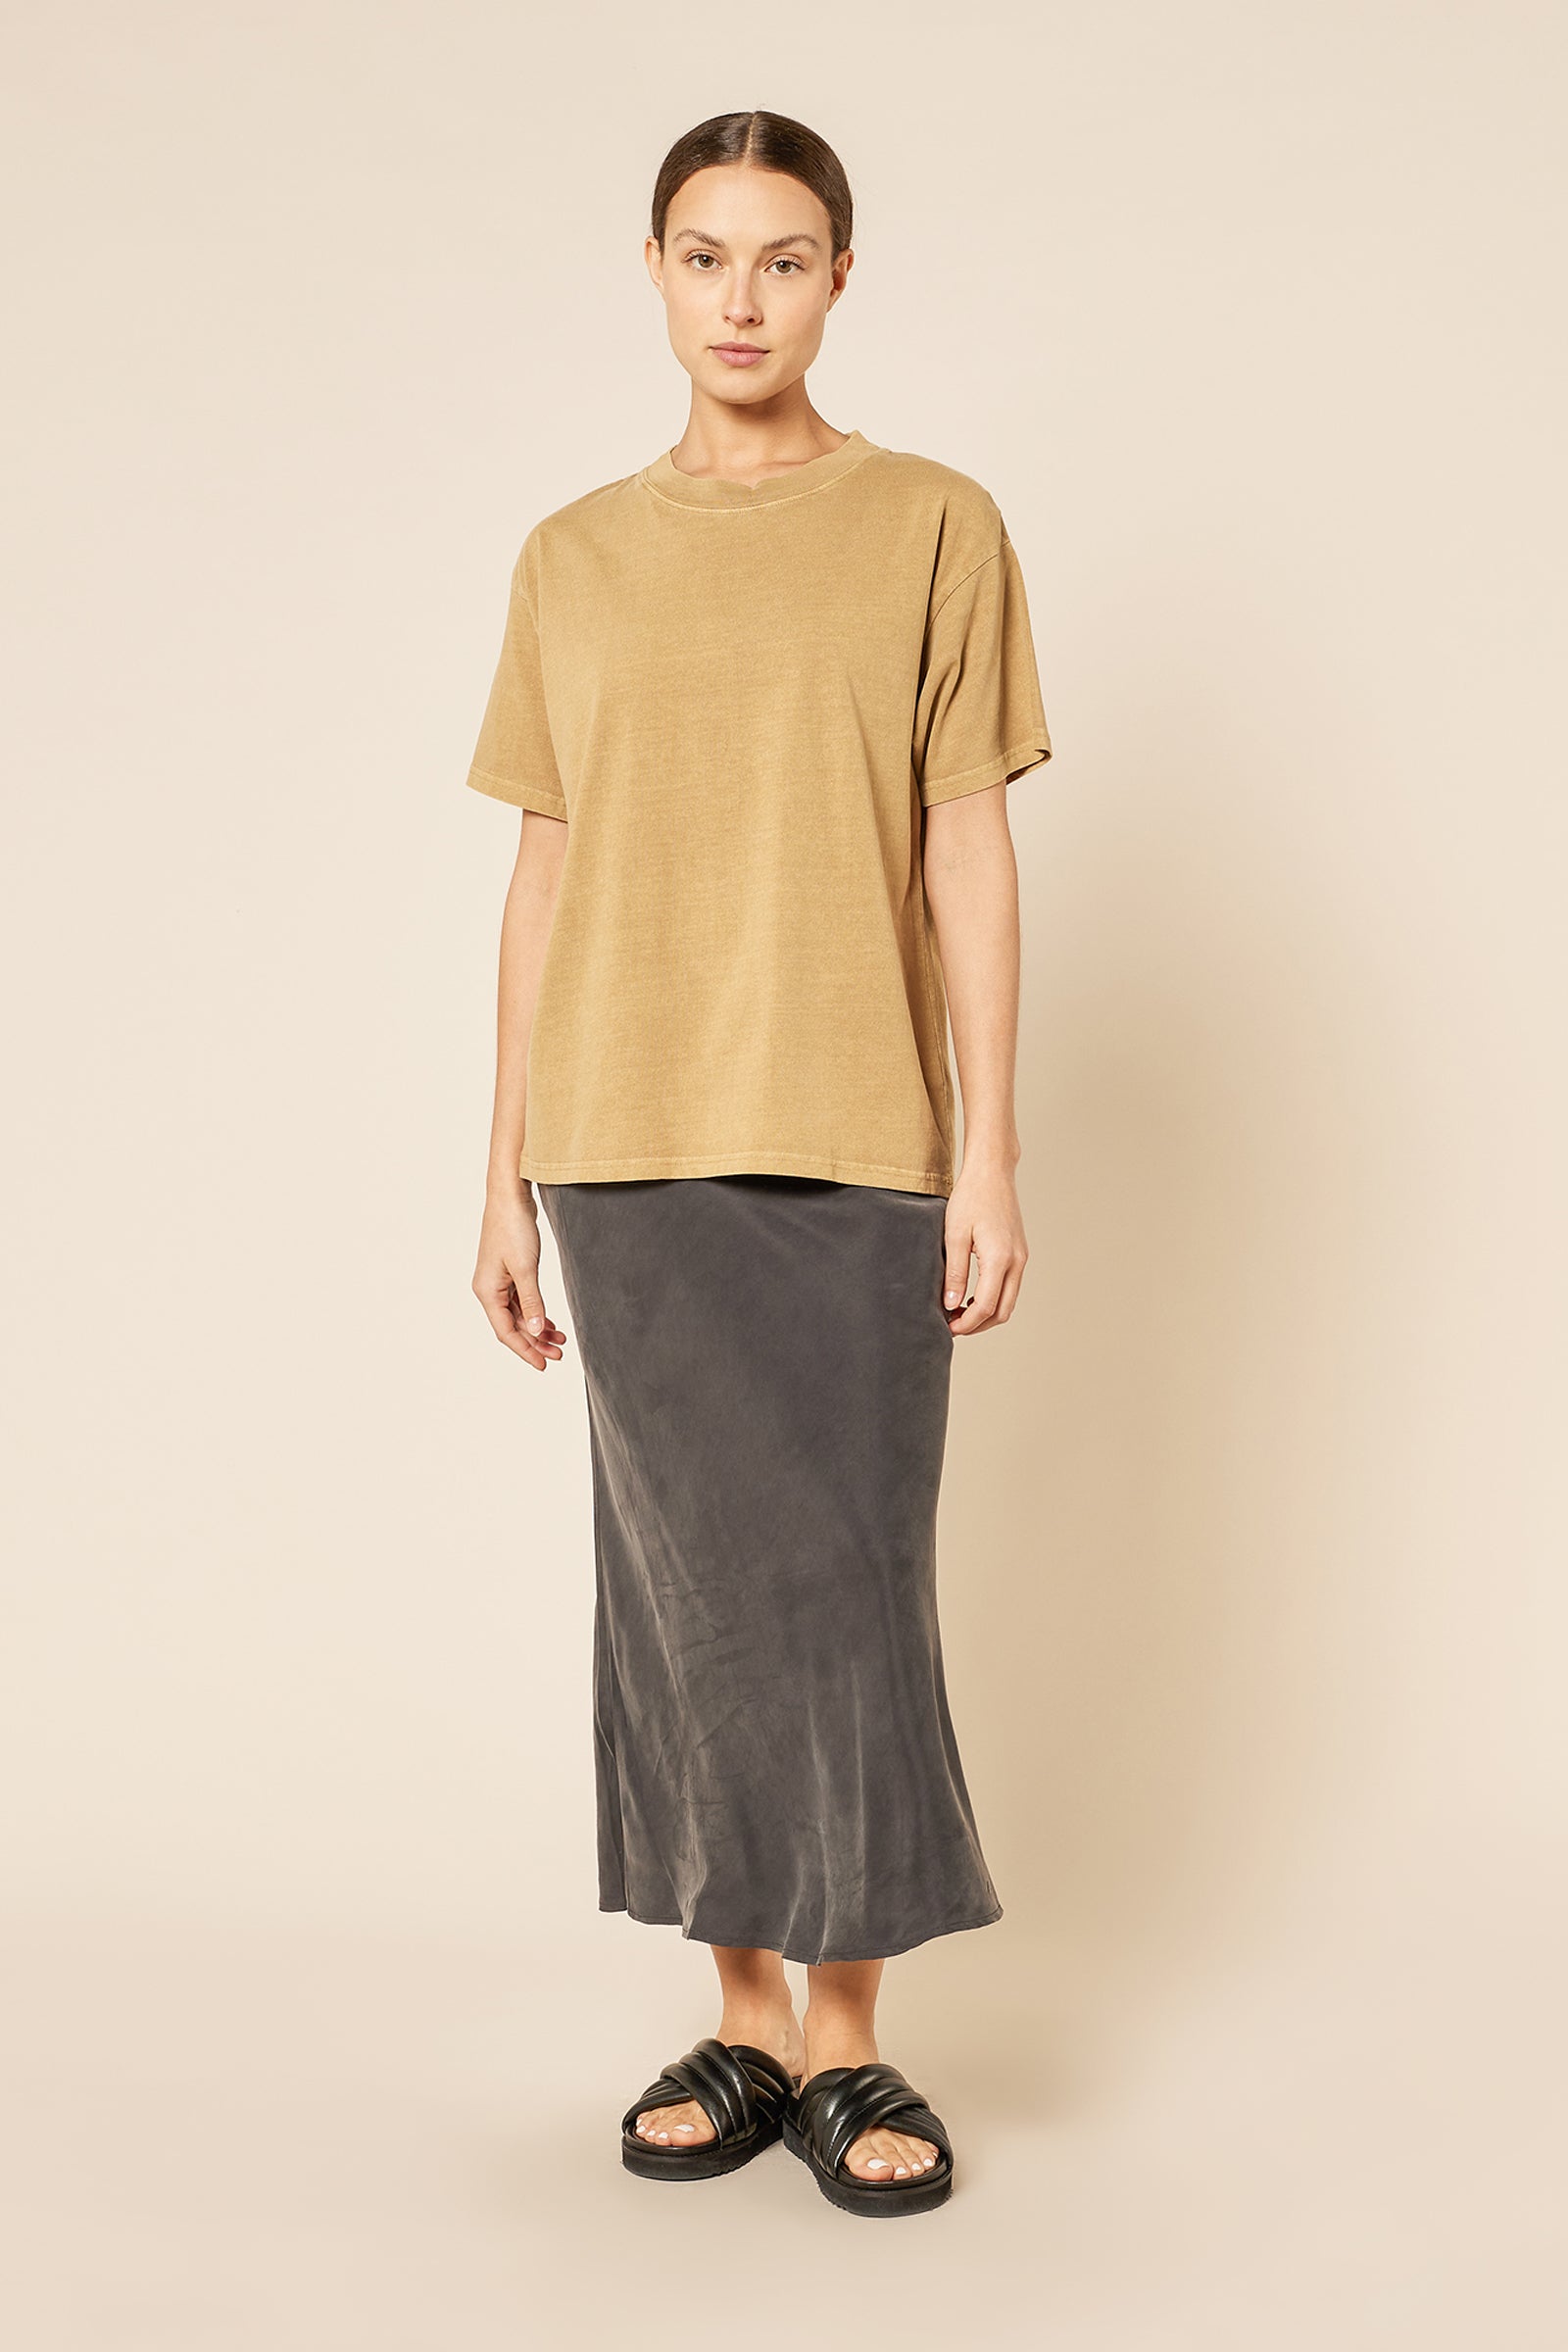 Nude Lucy Frankie Organic Washed Bf Tee In a Brown Oak Colour